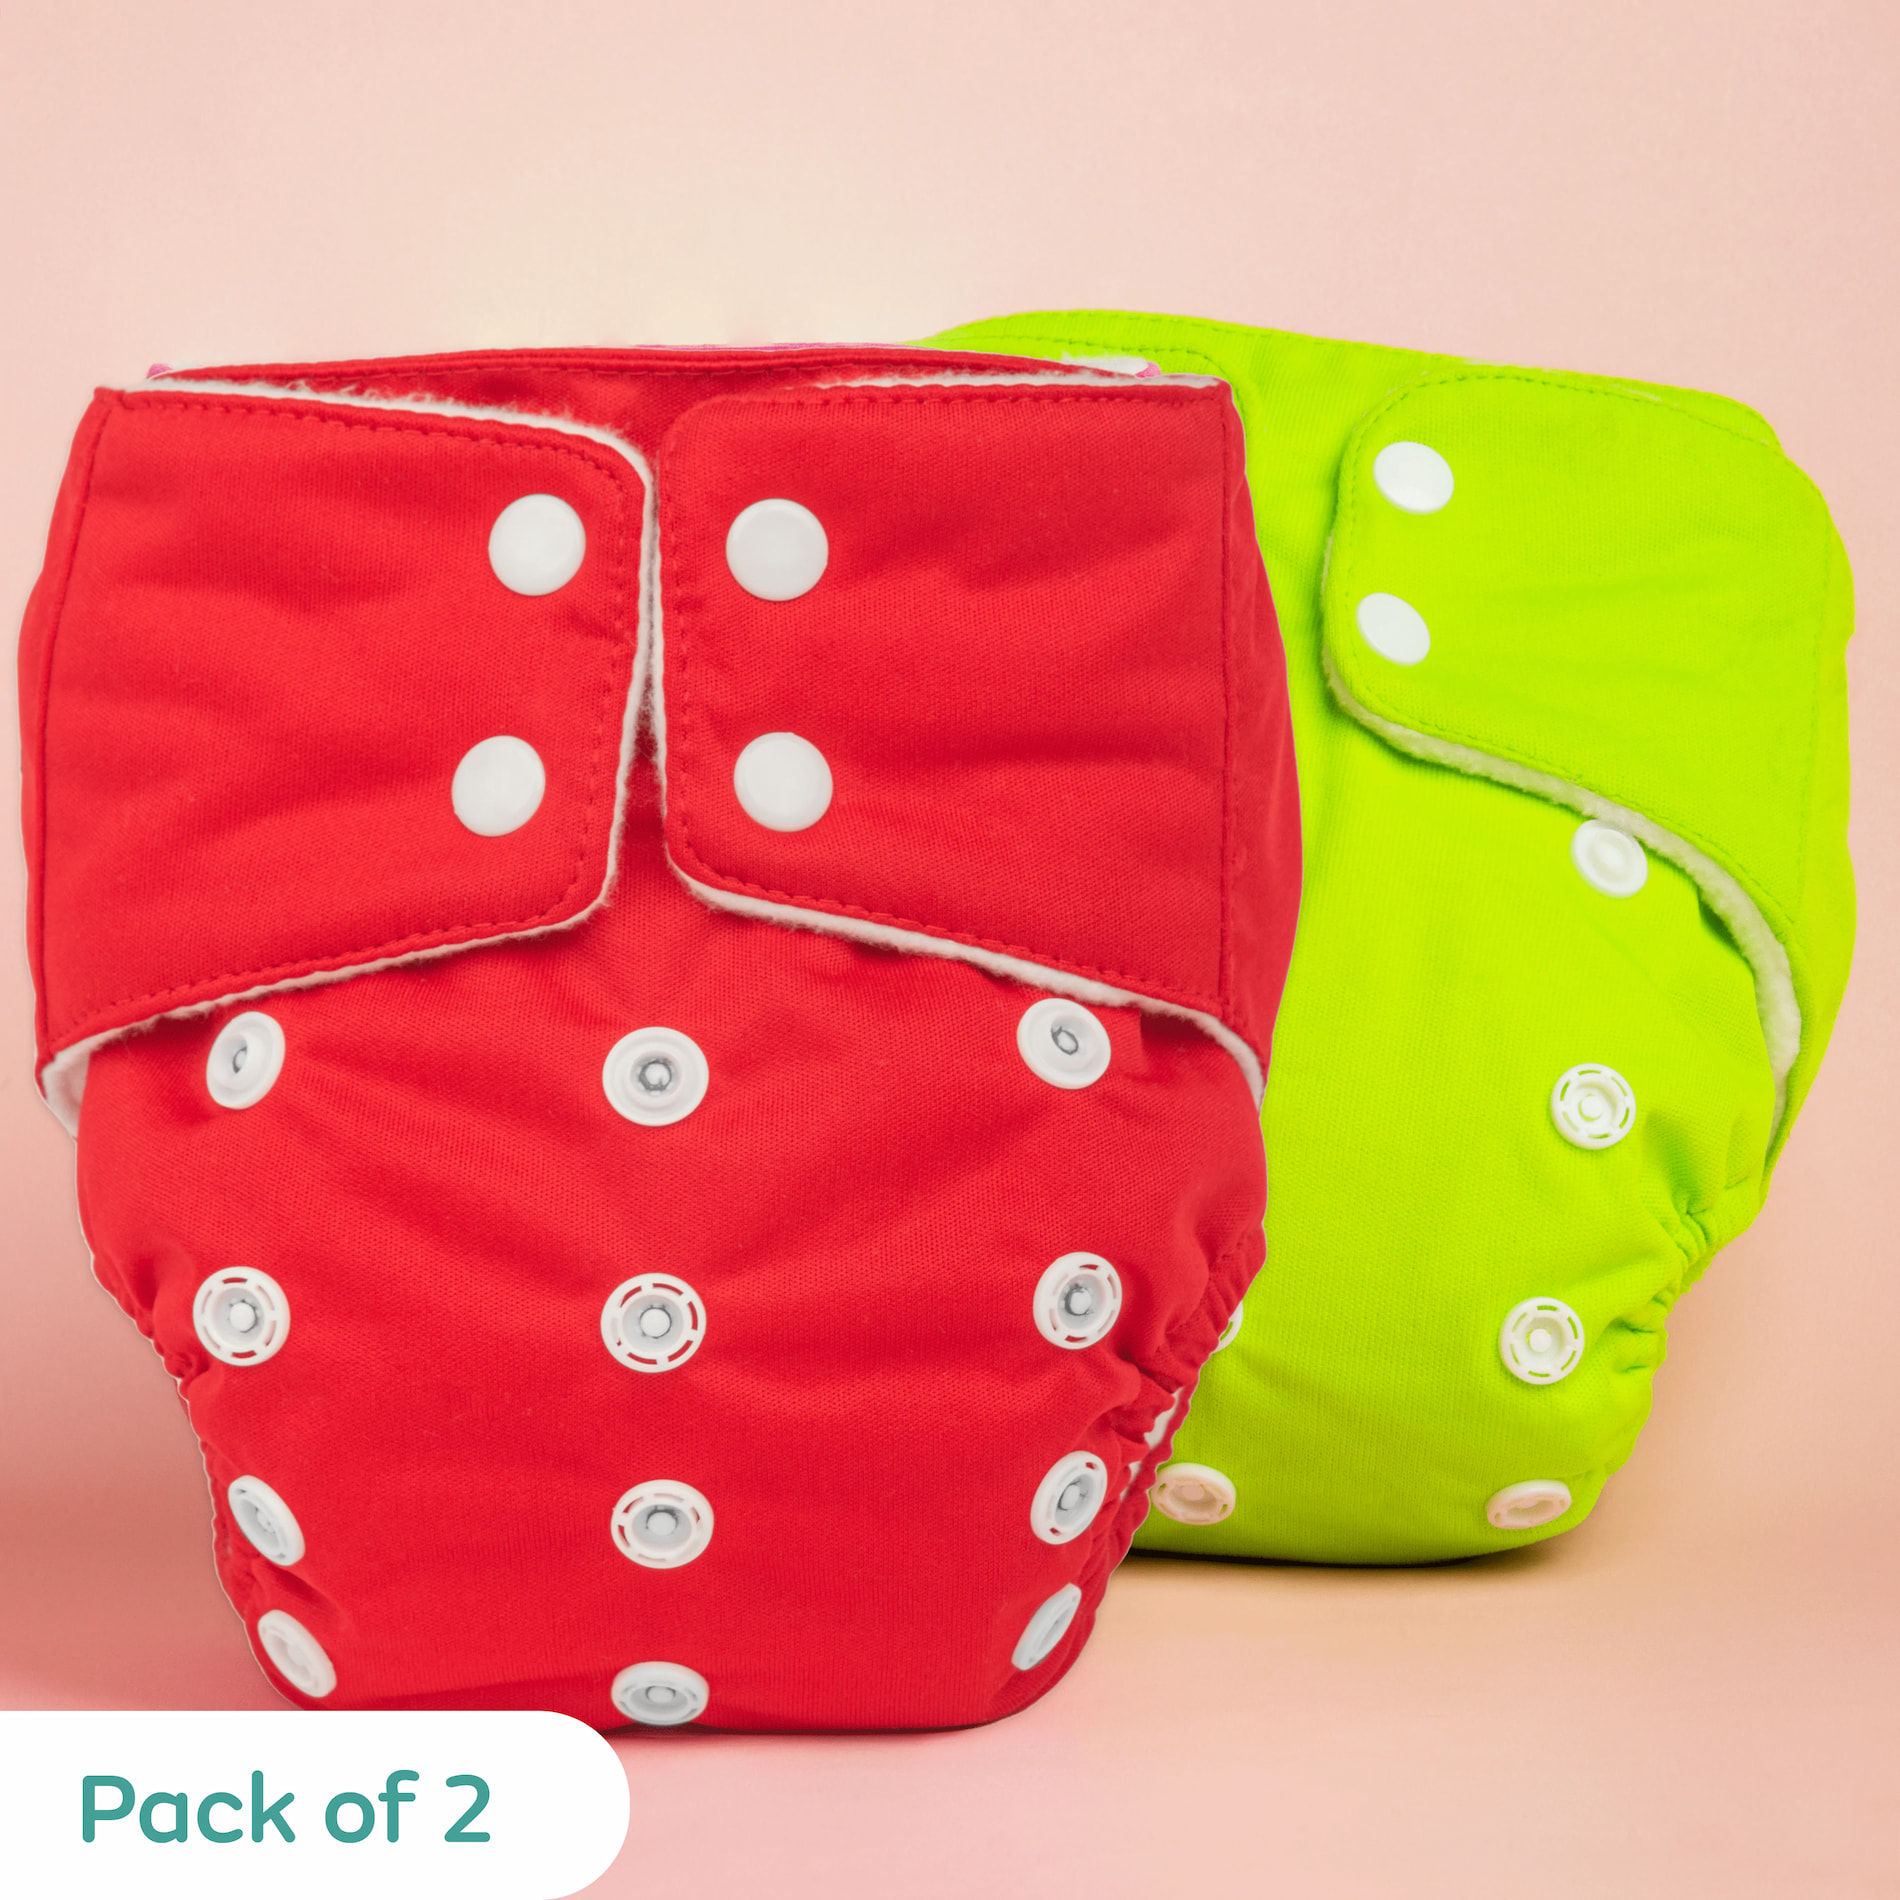 Adjustable Washable & Reusable Cloth Diaper With Dry Feel, Absorbent Insert Pad (3M-3Y)- Red & Green- Pack of 2